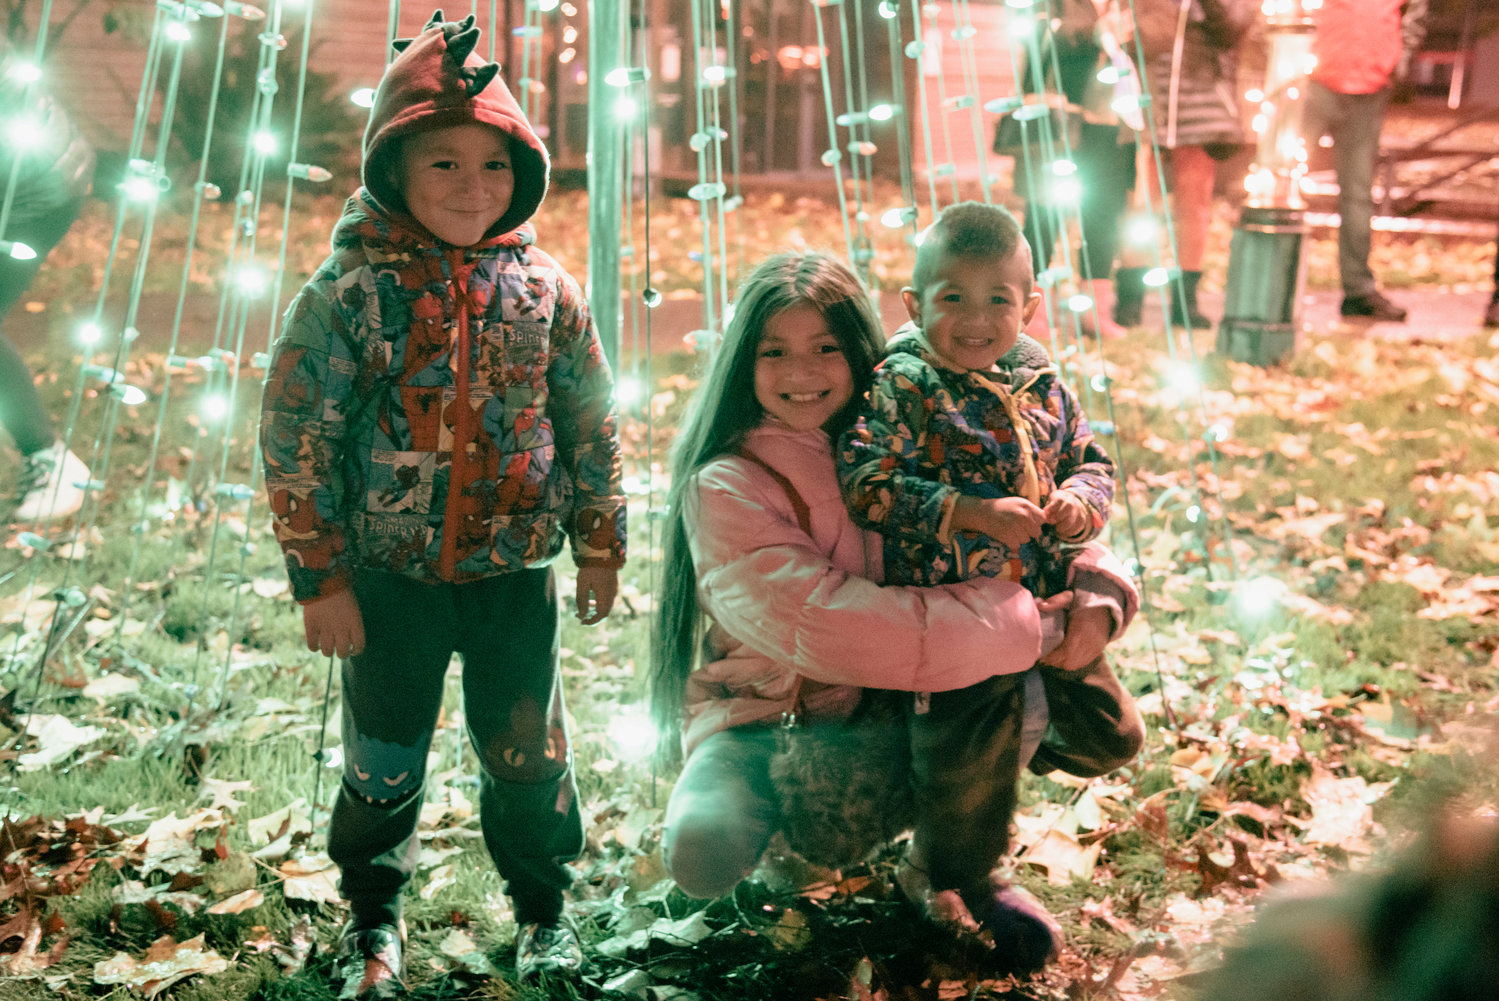 Members of the Villalba family pose for a photo with Christmas lights during a tree lighting ceremony in George Washington Park Friday night.